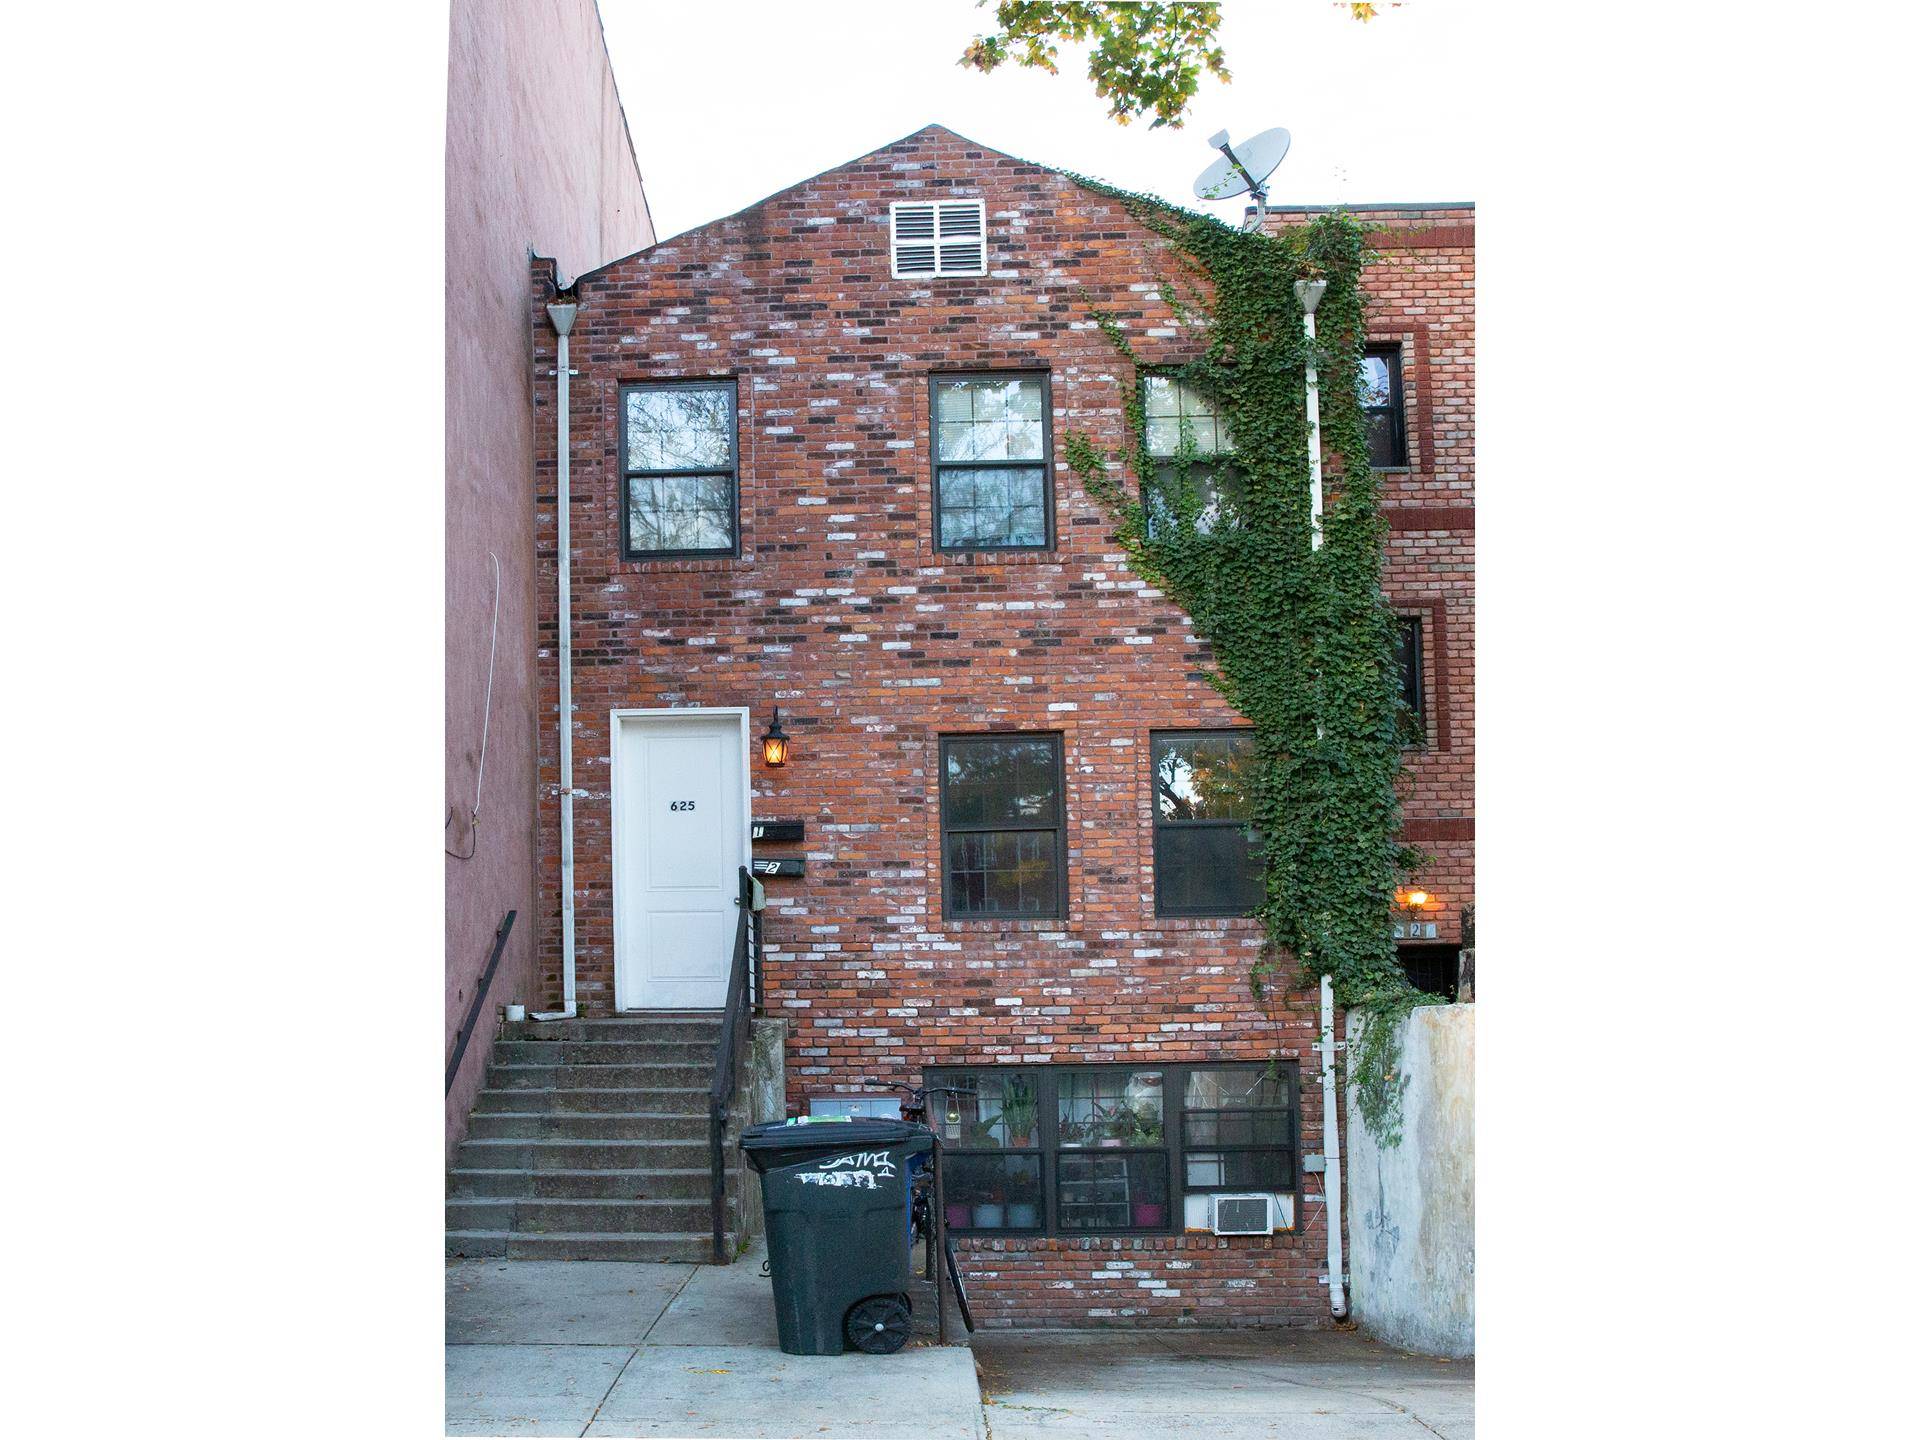 Welcome to 625 Madison Street, located in beautiful Bedford Stuyvesant.